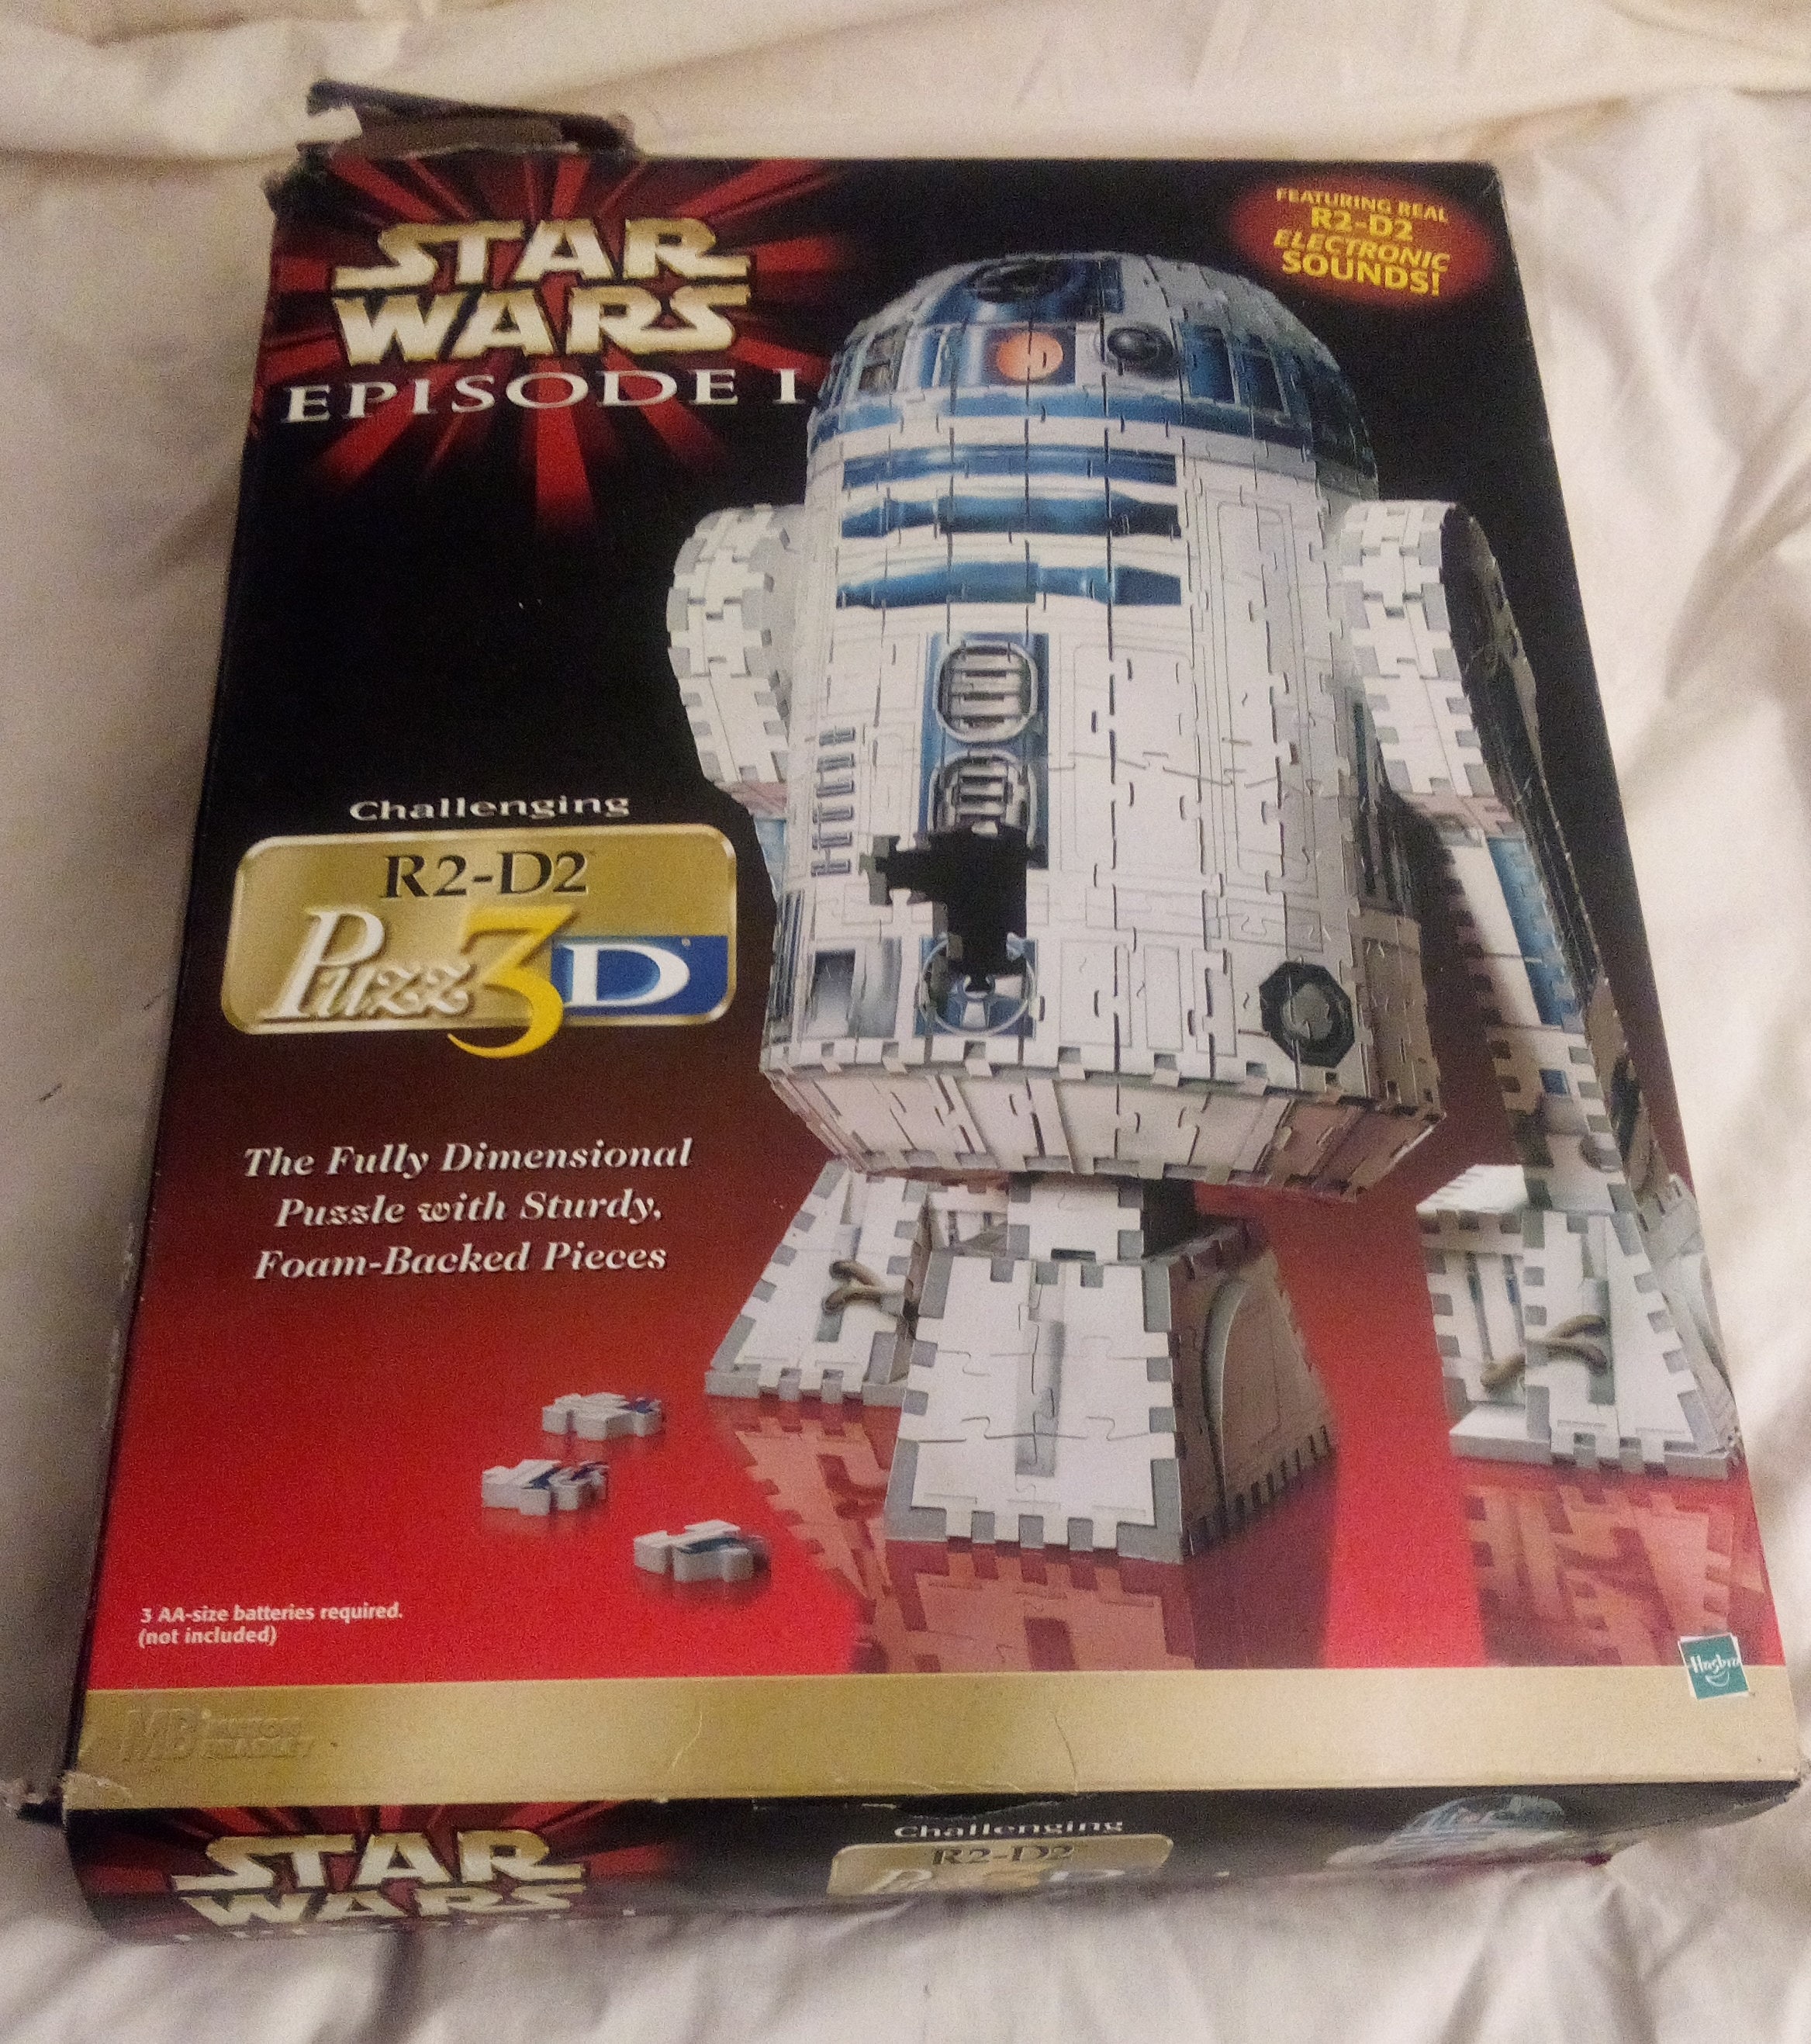 Star Wars Episode 1 R2-D2 Puzz Puzzle With R2-D2 - Etsy